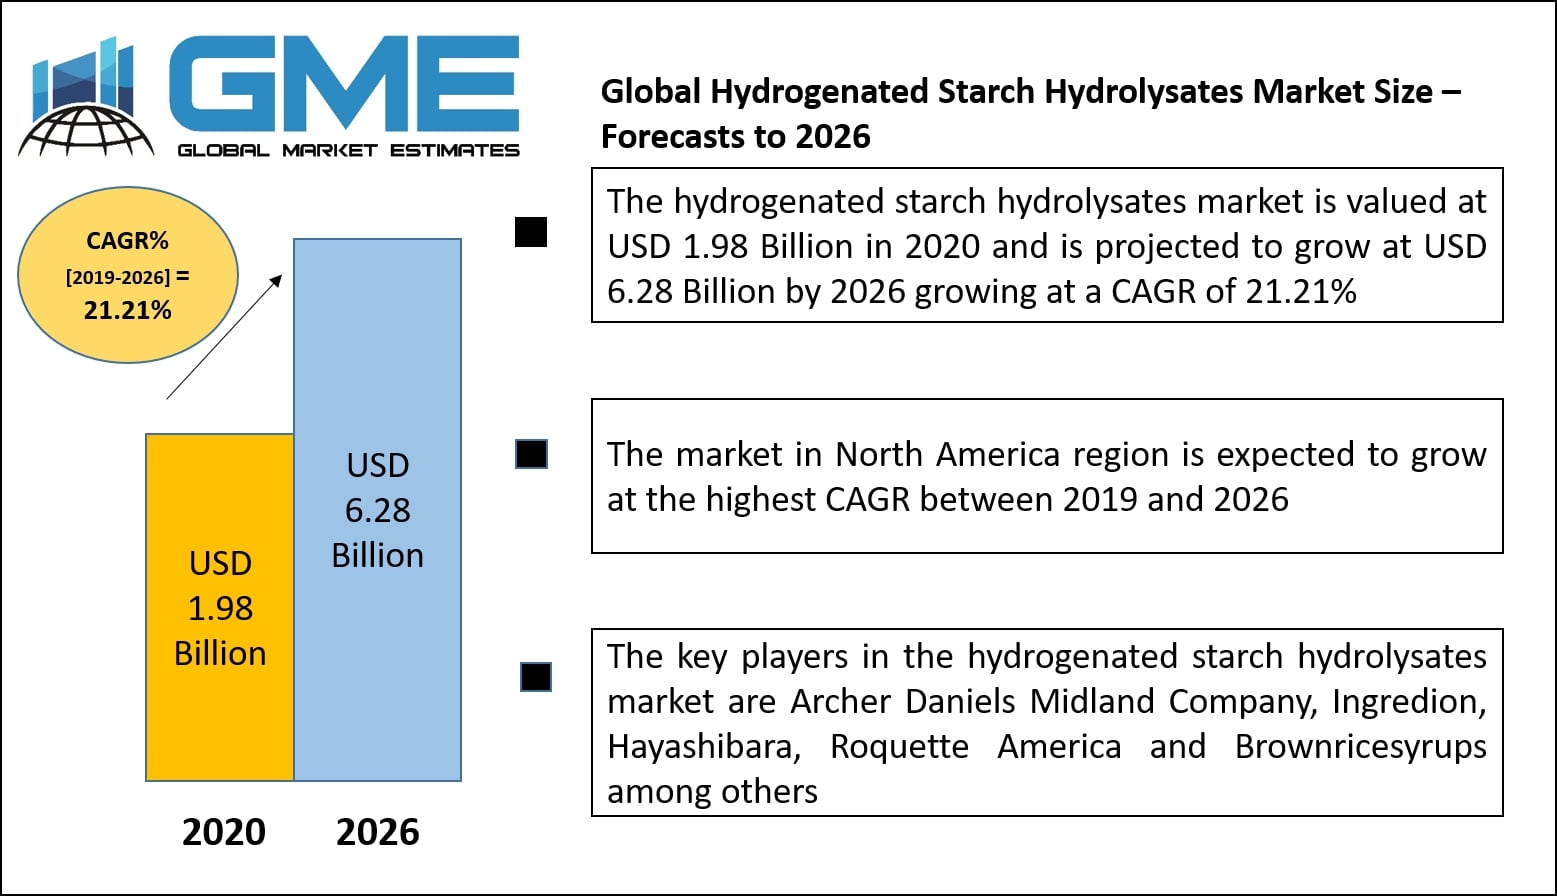 Global Hydrogenated Starch Hydrolysates Market Size – Forecasts to 2026